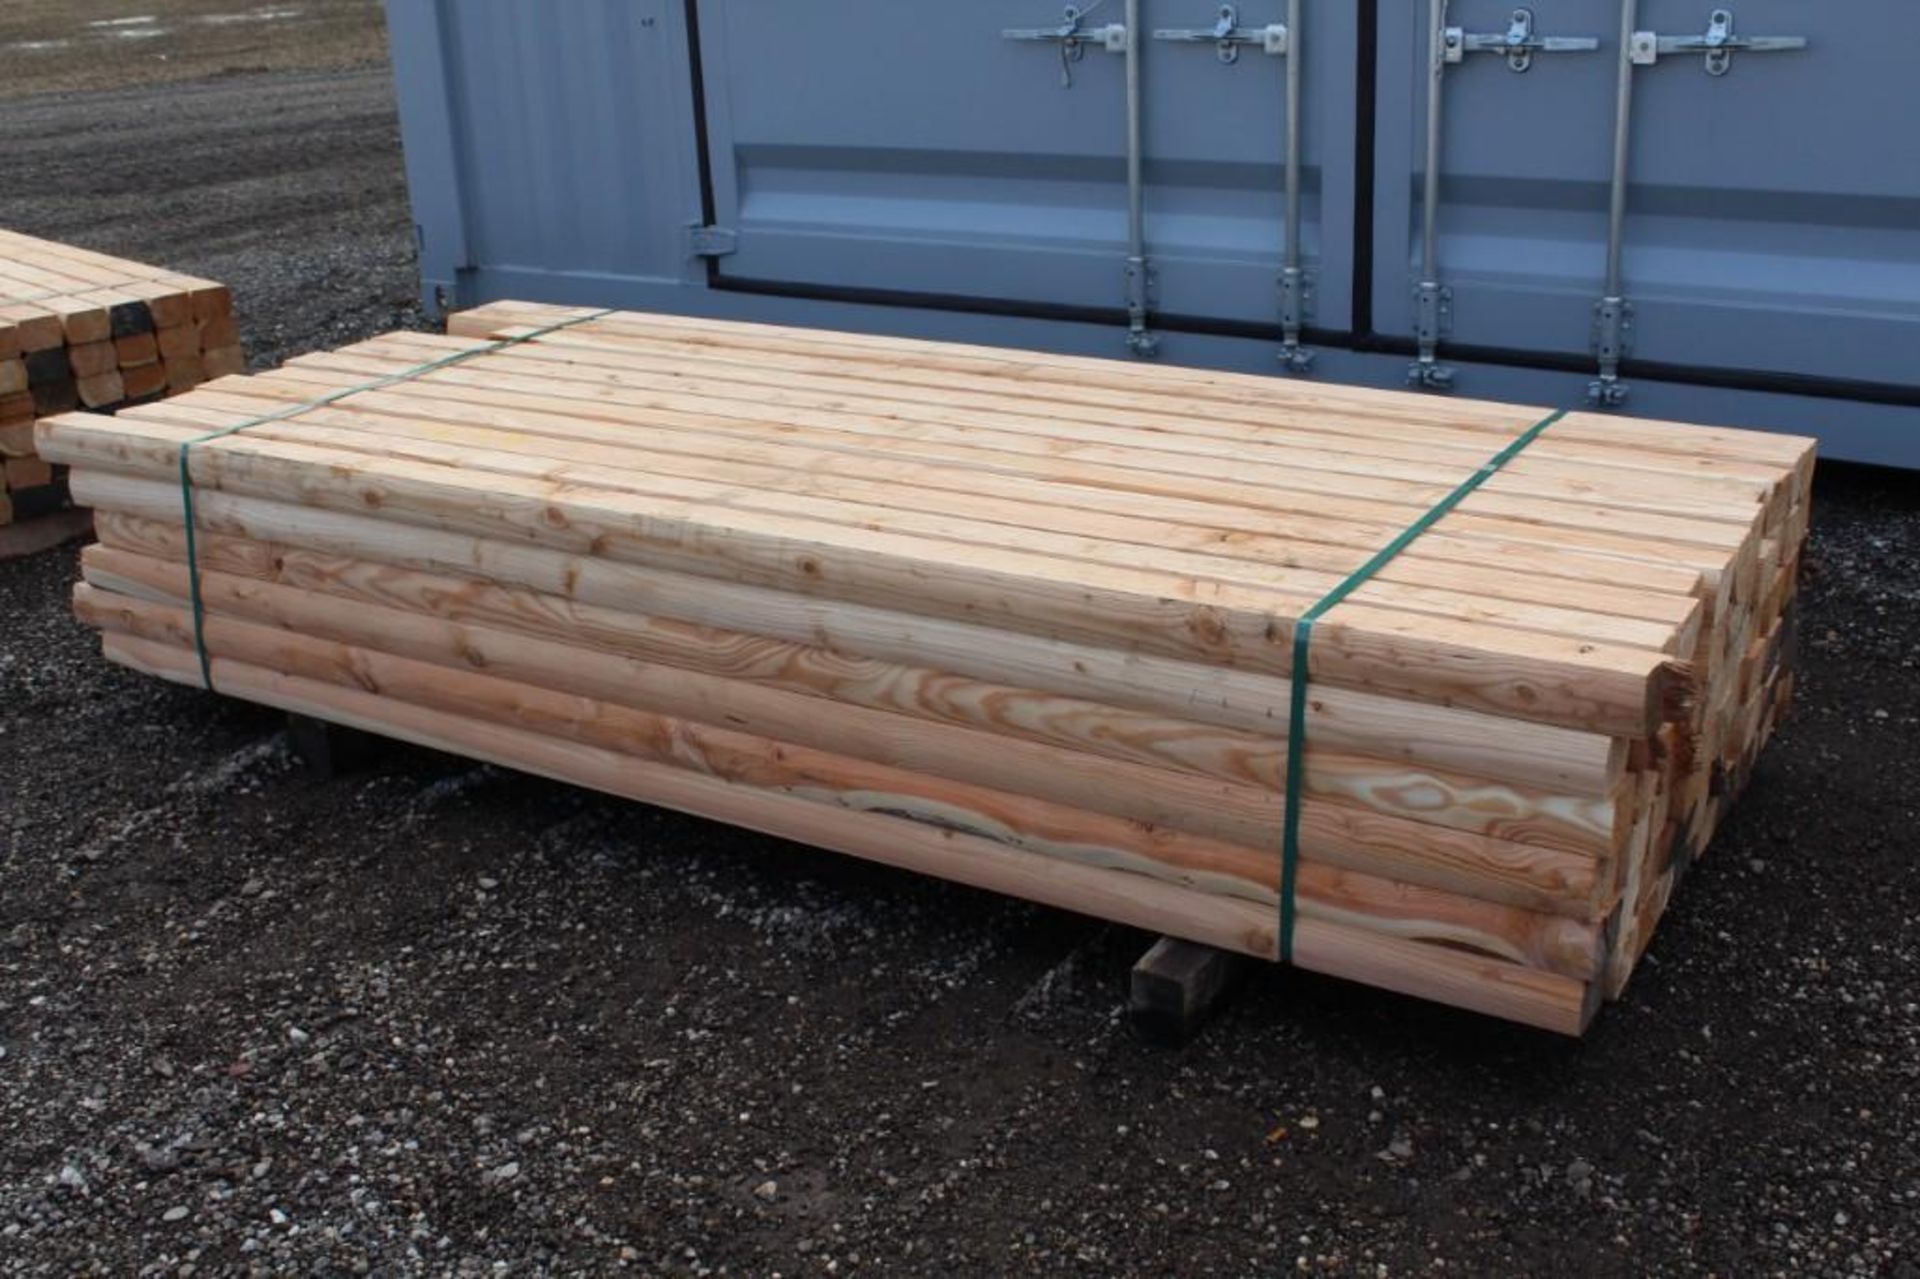 Larch Landscaping Ties/Posts